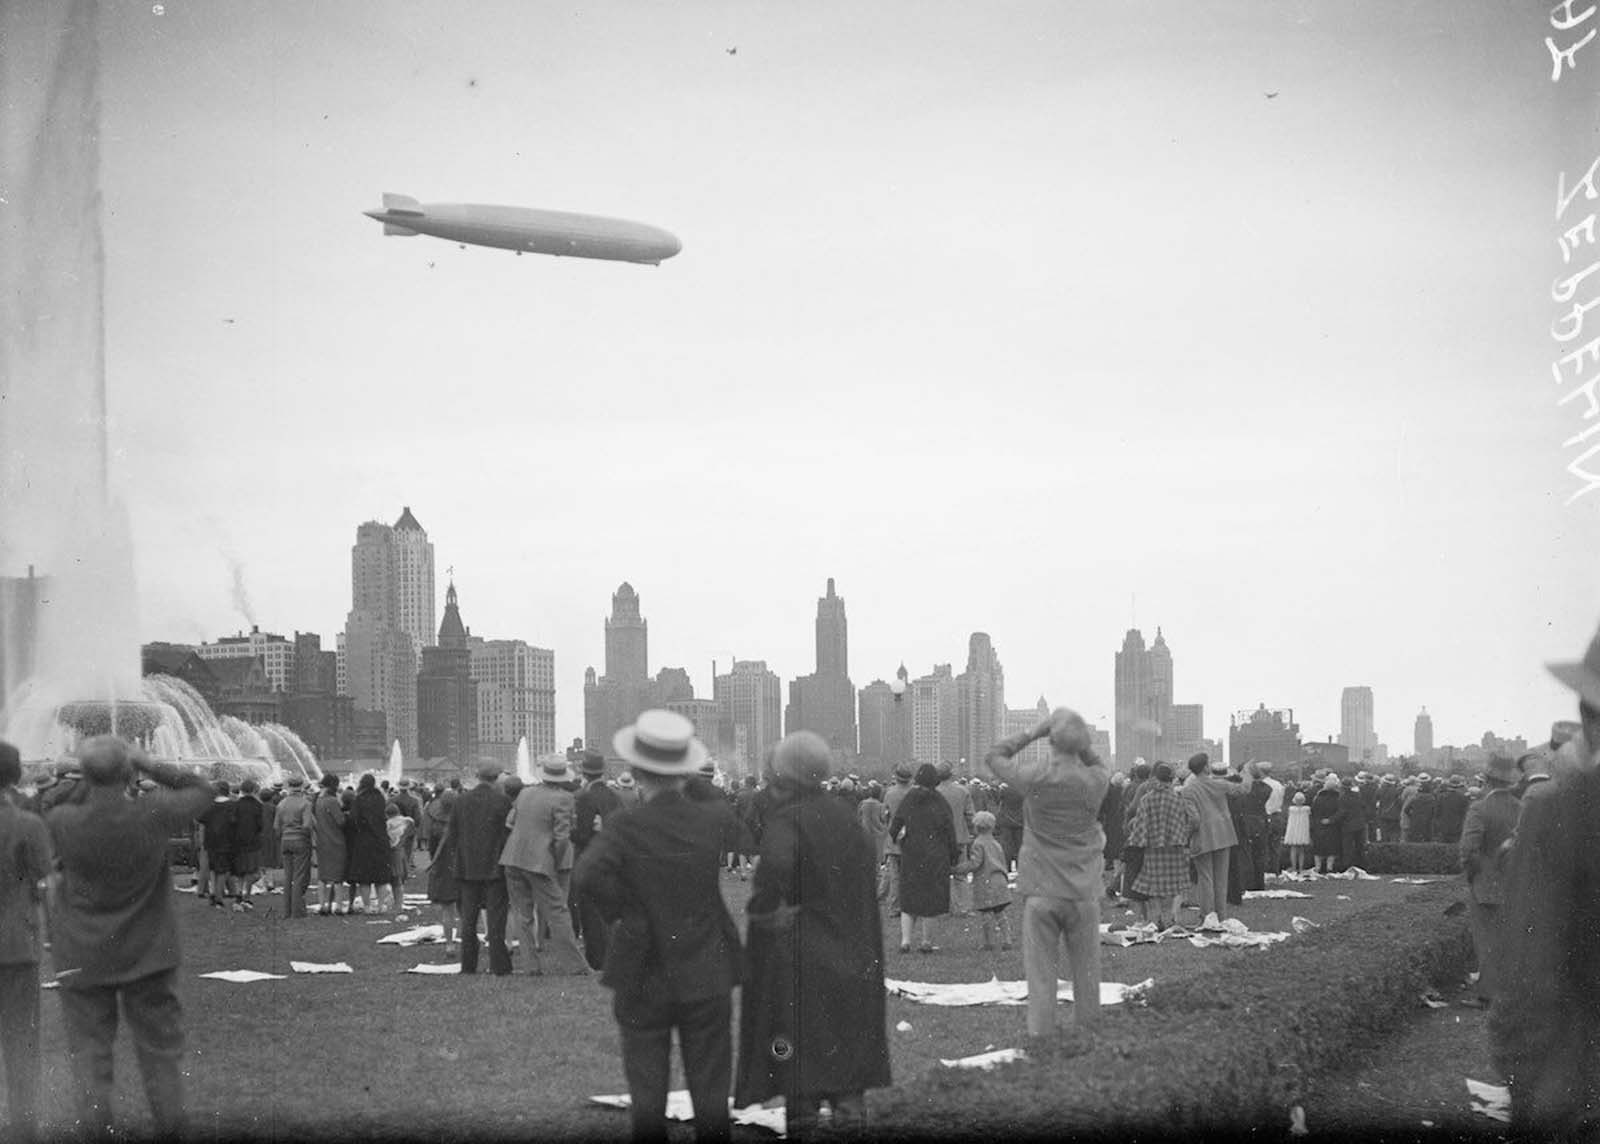 The Graf Zeppelin viewed in profile flying at a downward angle over Buckingham Fountain in Grant Park.